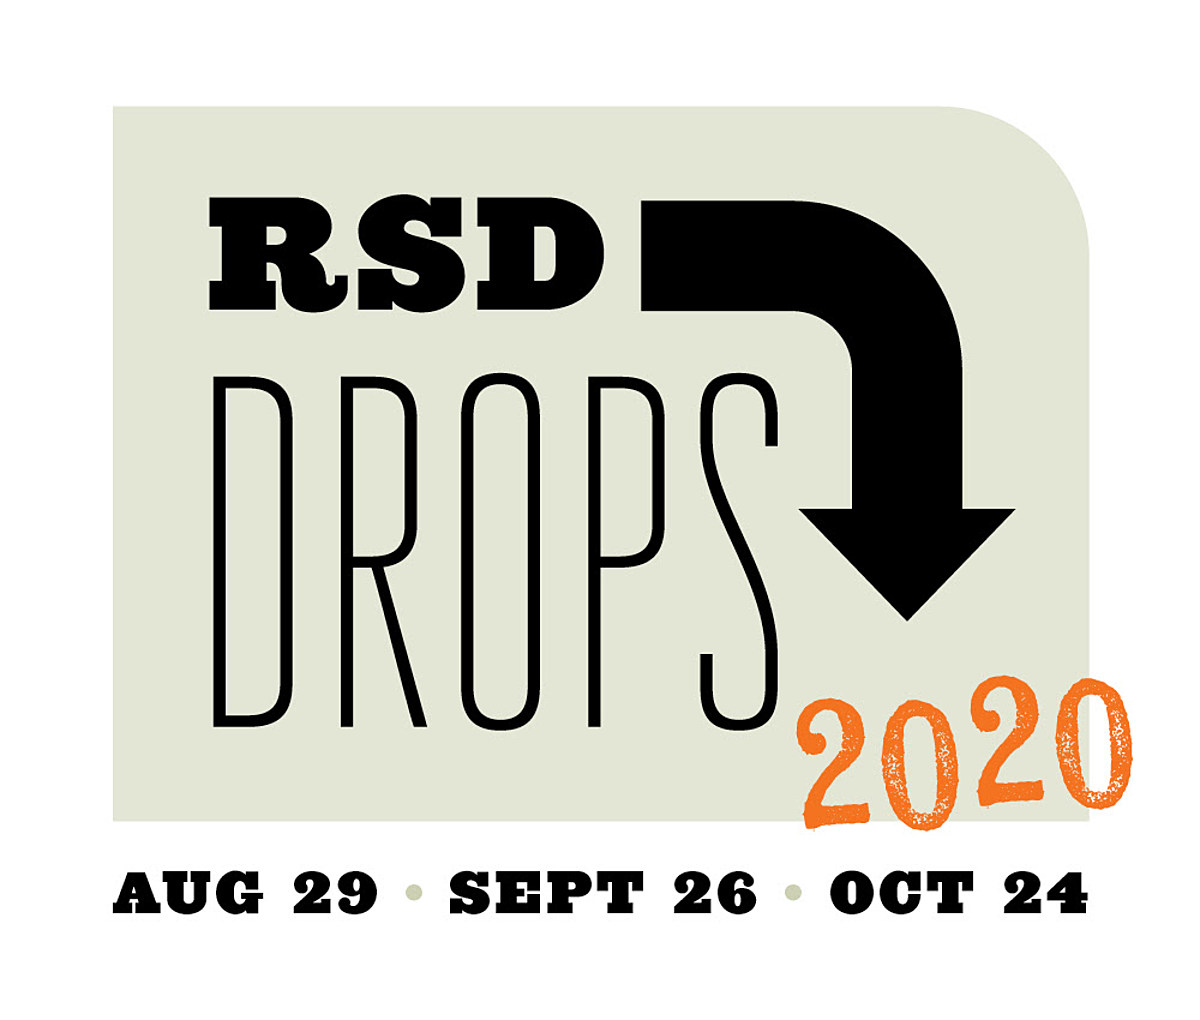 Record Store Day 2020 postponed again, is now 3 events in August, September  & October